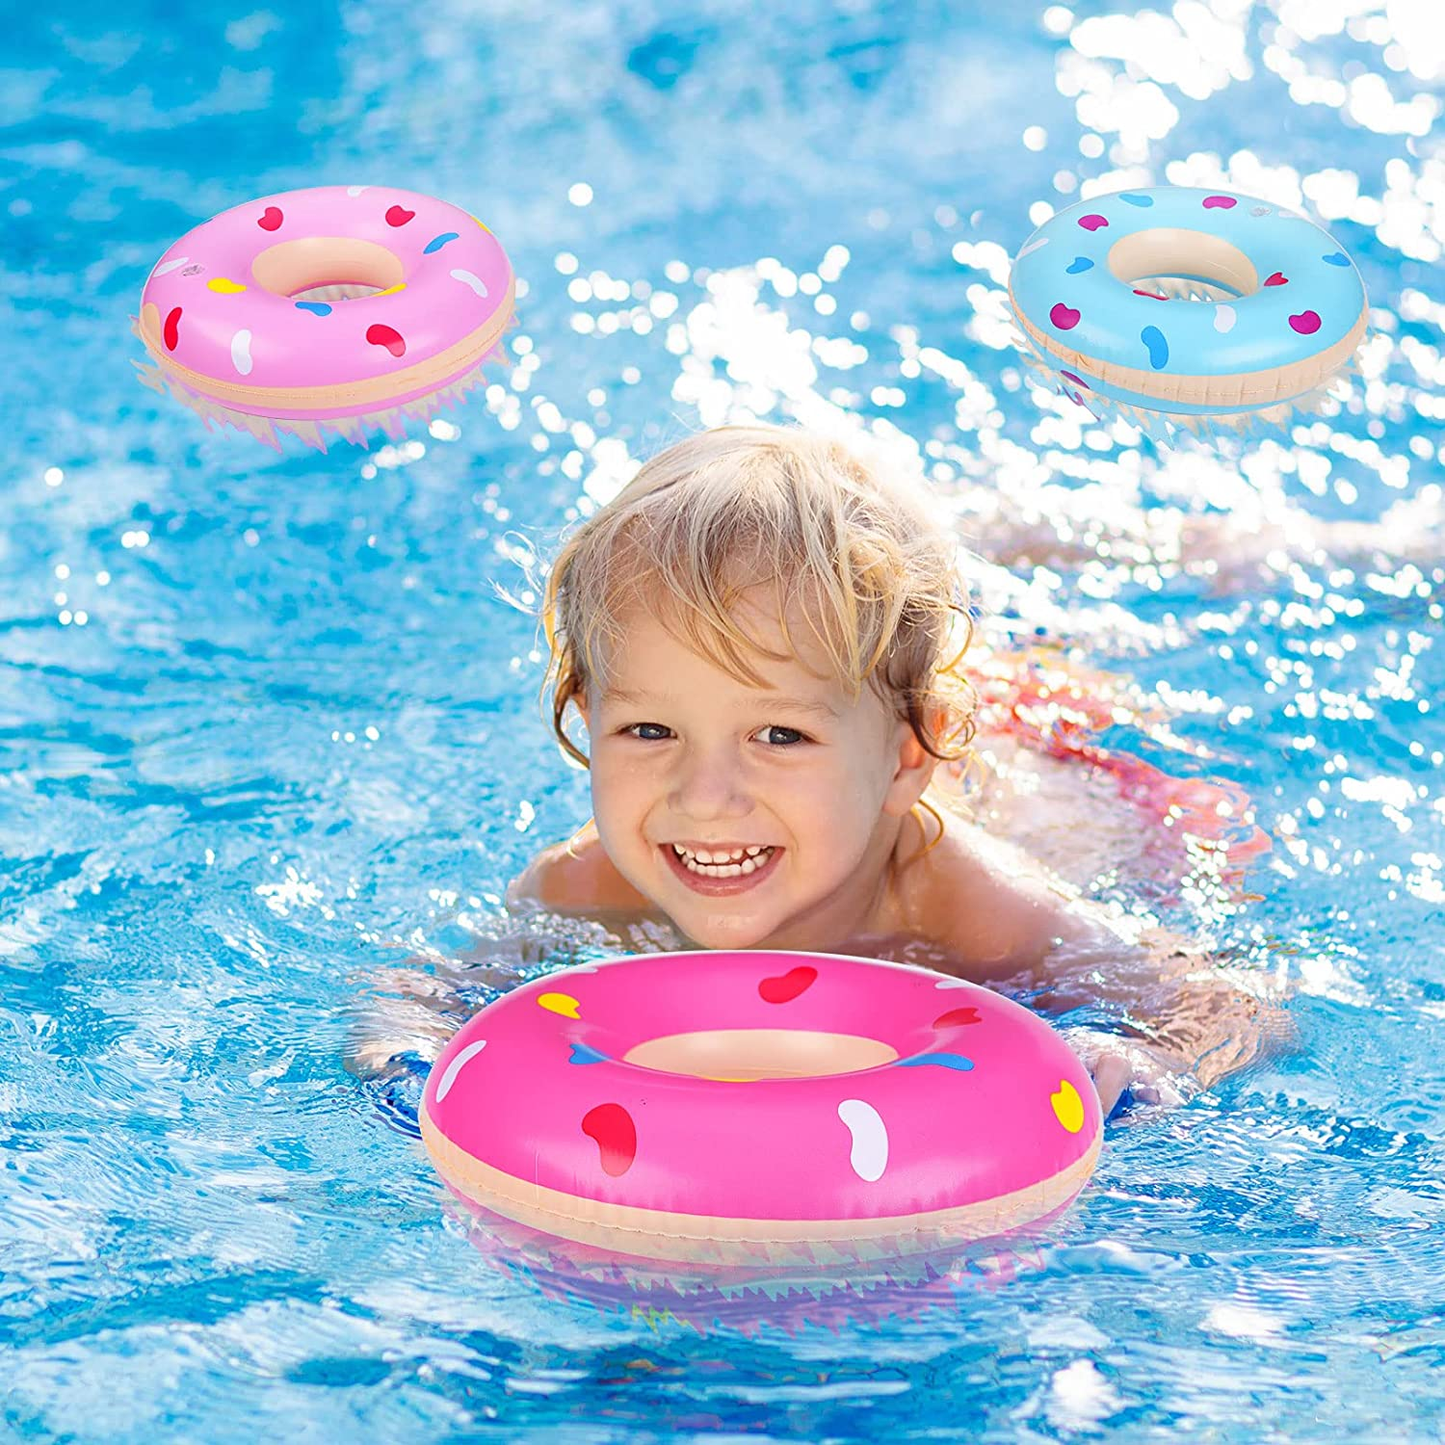 6 Packs Inflatable Pool Donuts Mini Sprinkle Donut Inflatables Multicolored Floats Small Swimming Ring Tubes for Younger Kids Toddlers Summer, Pool ,Beach Birthday Party Decorations